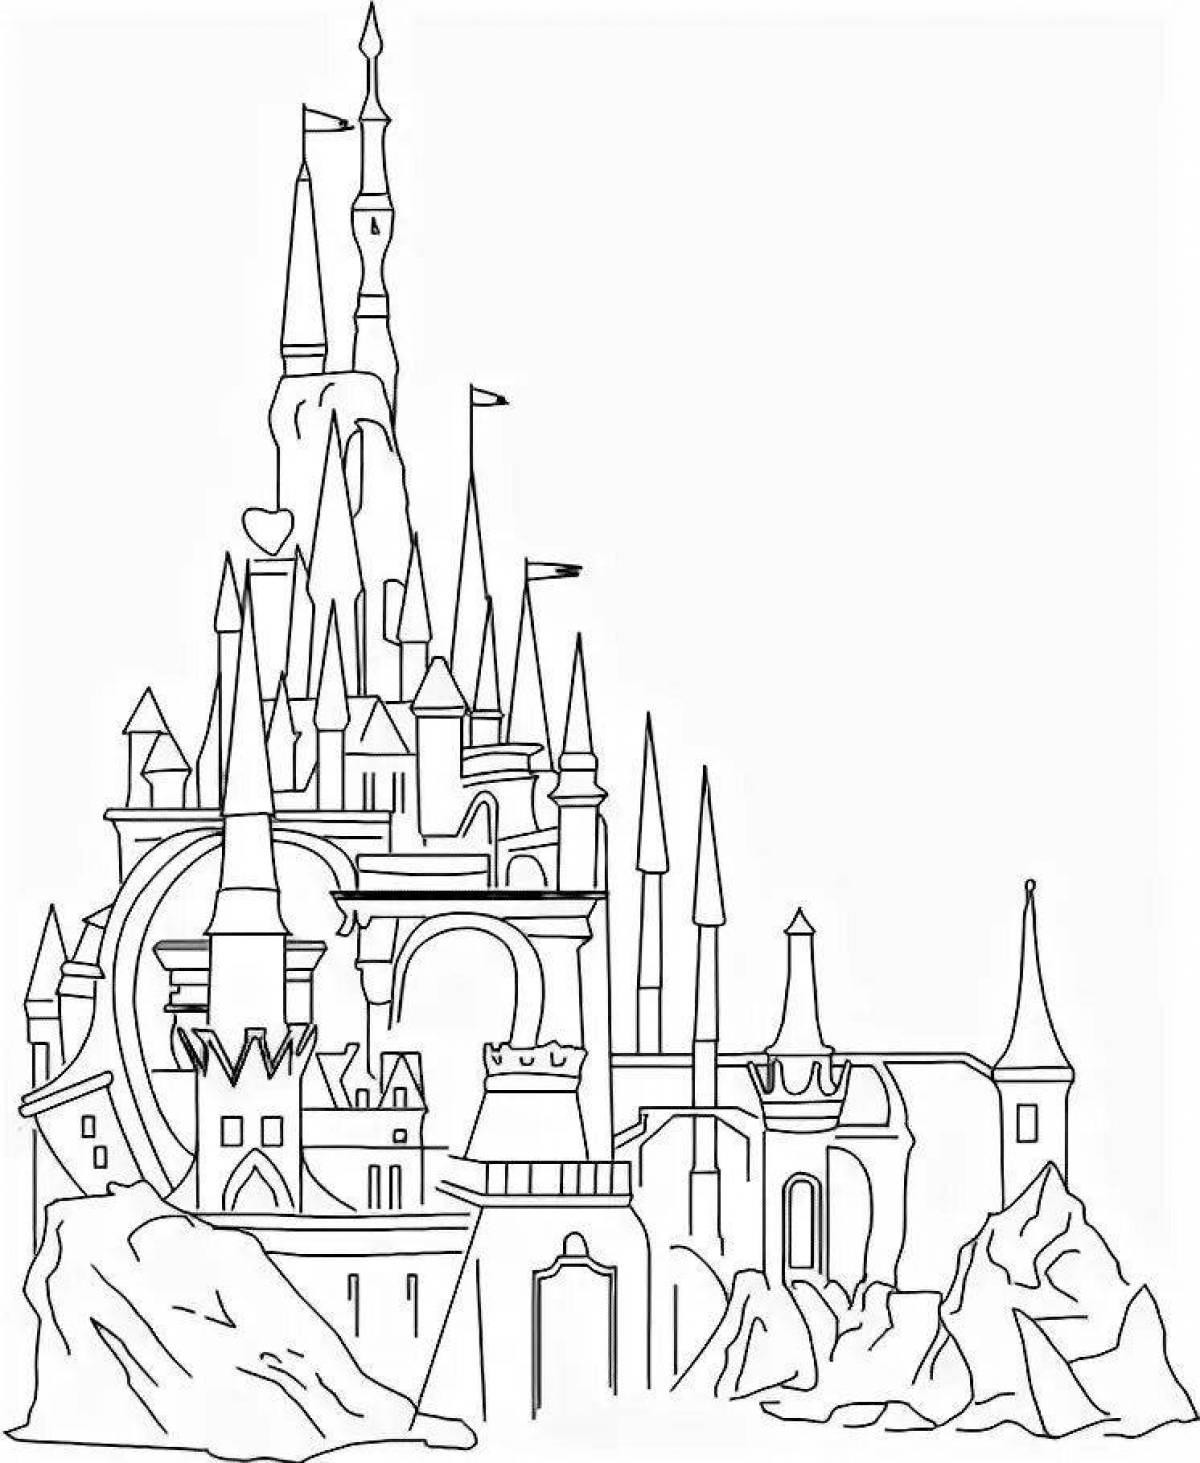 Coloring page of the snow queen's delightful castle